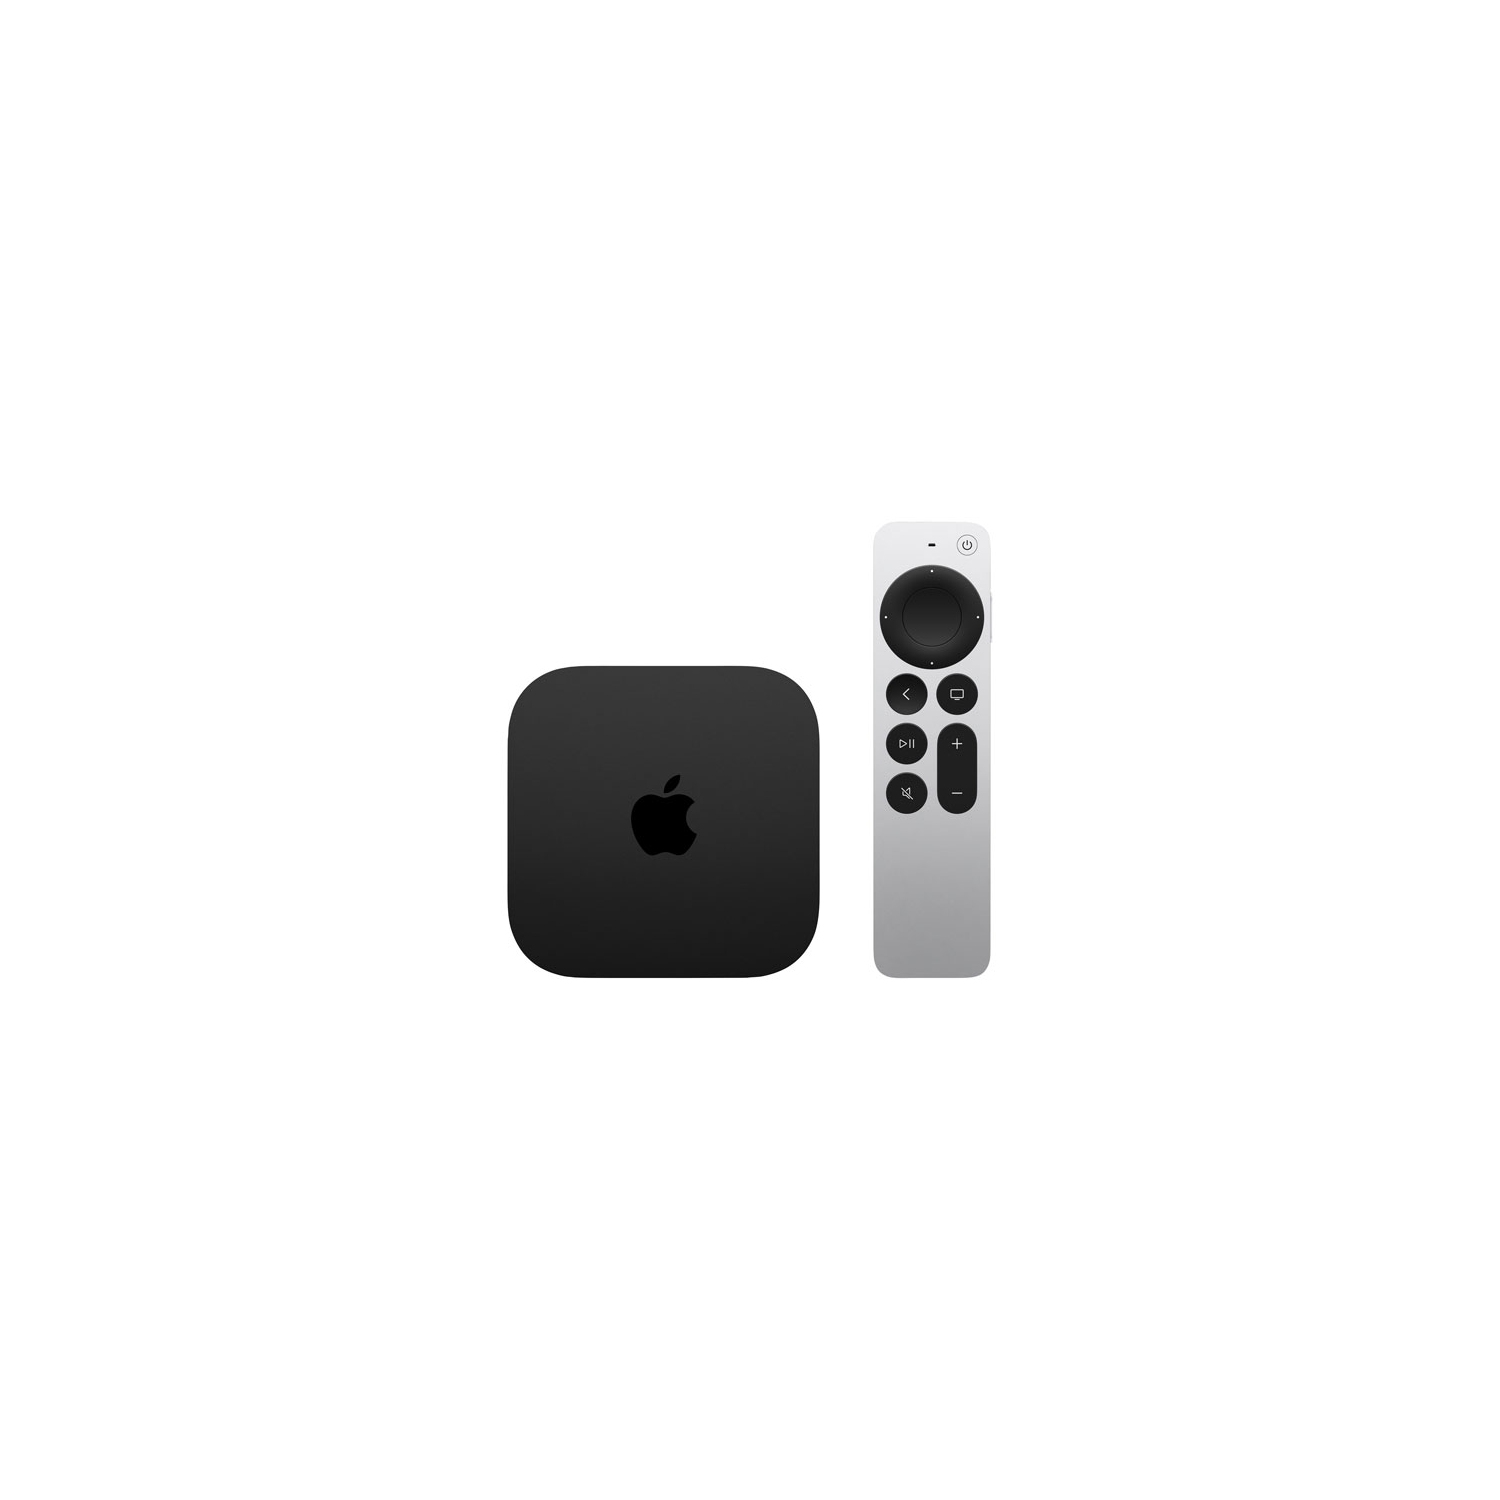 Refurbished (Excellent) - Apple TV 4K 128GB with Wi-Fi & Ethernet (3rd Generation)